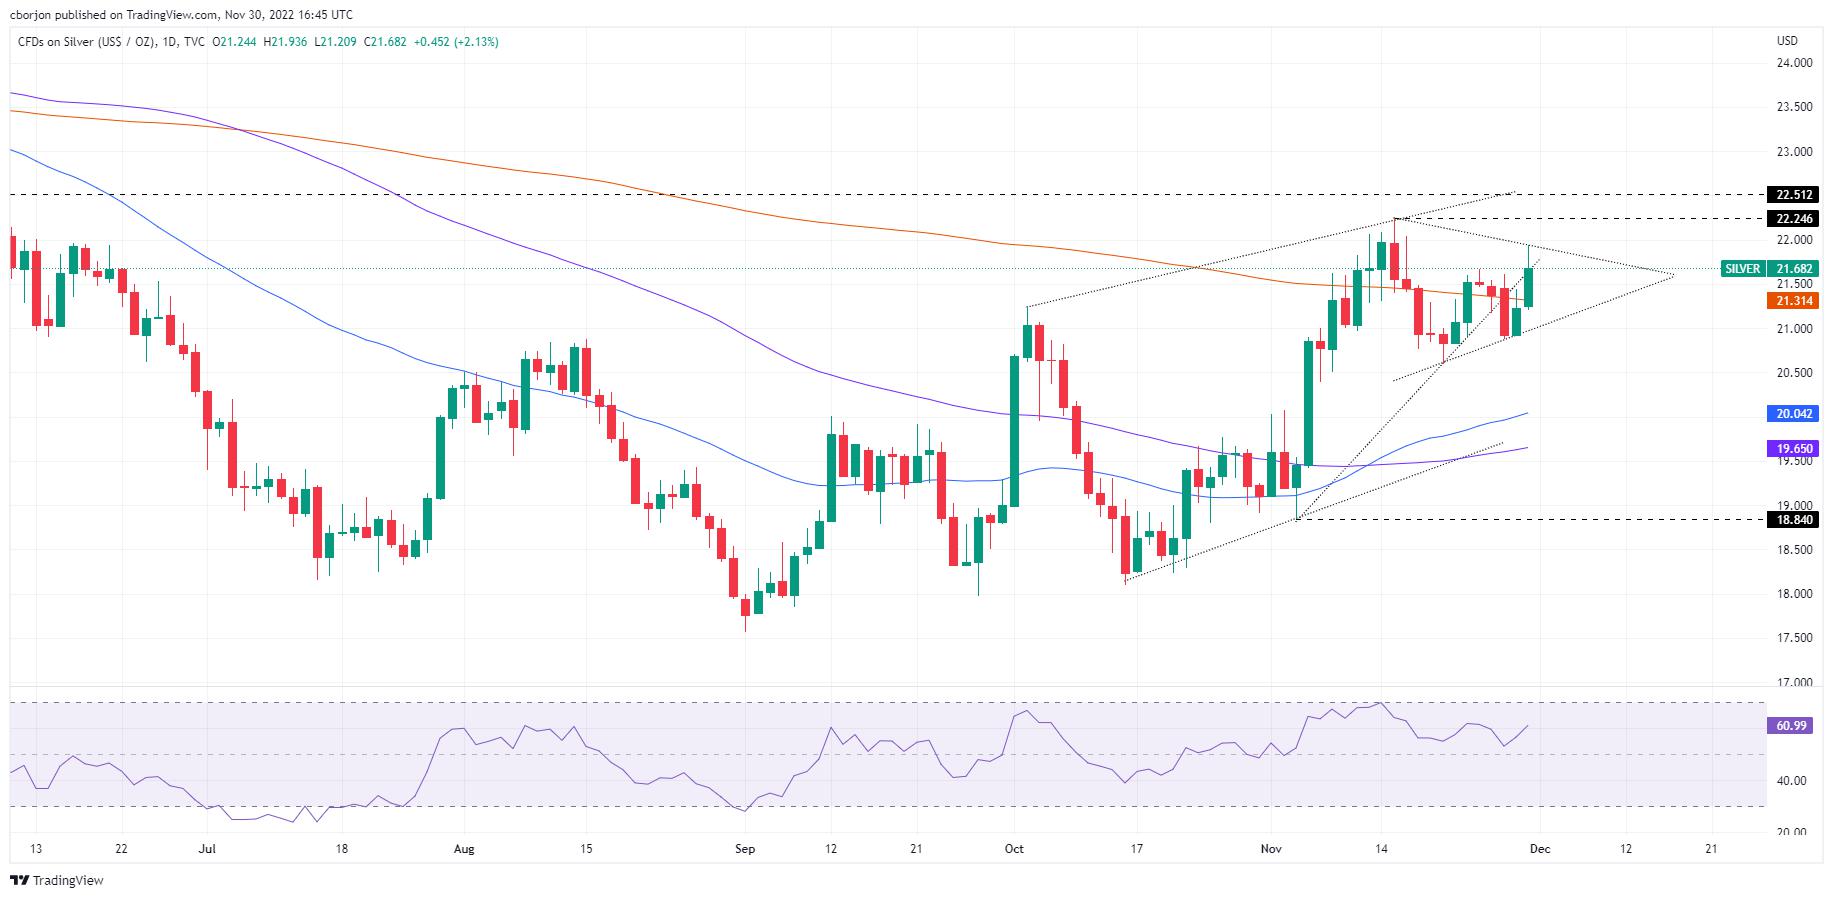 Silver Price Forecast: XAG/USD rallies above the 200-DMA, eyeing $22.00 ahead of Powell